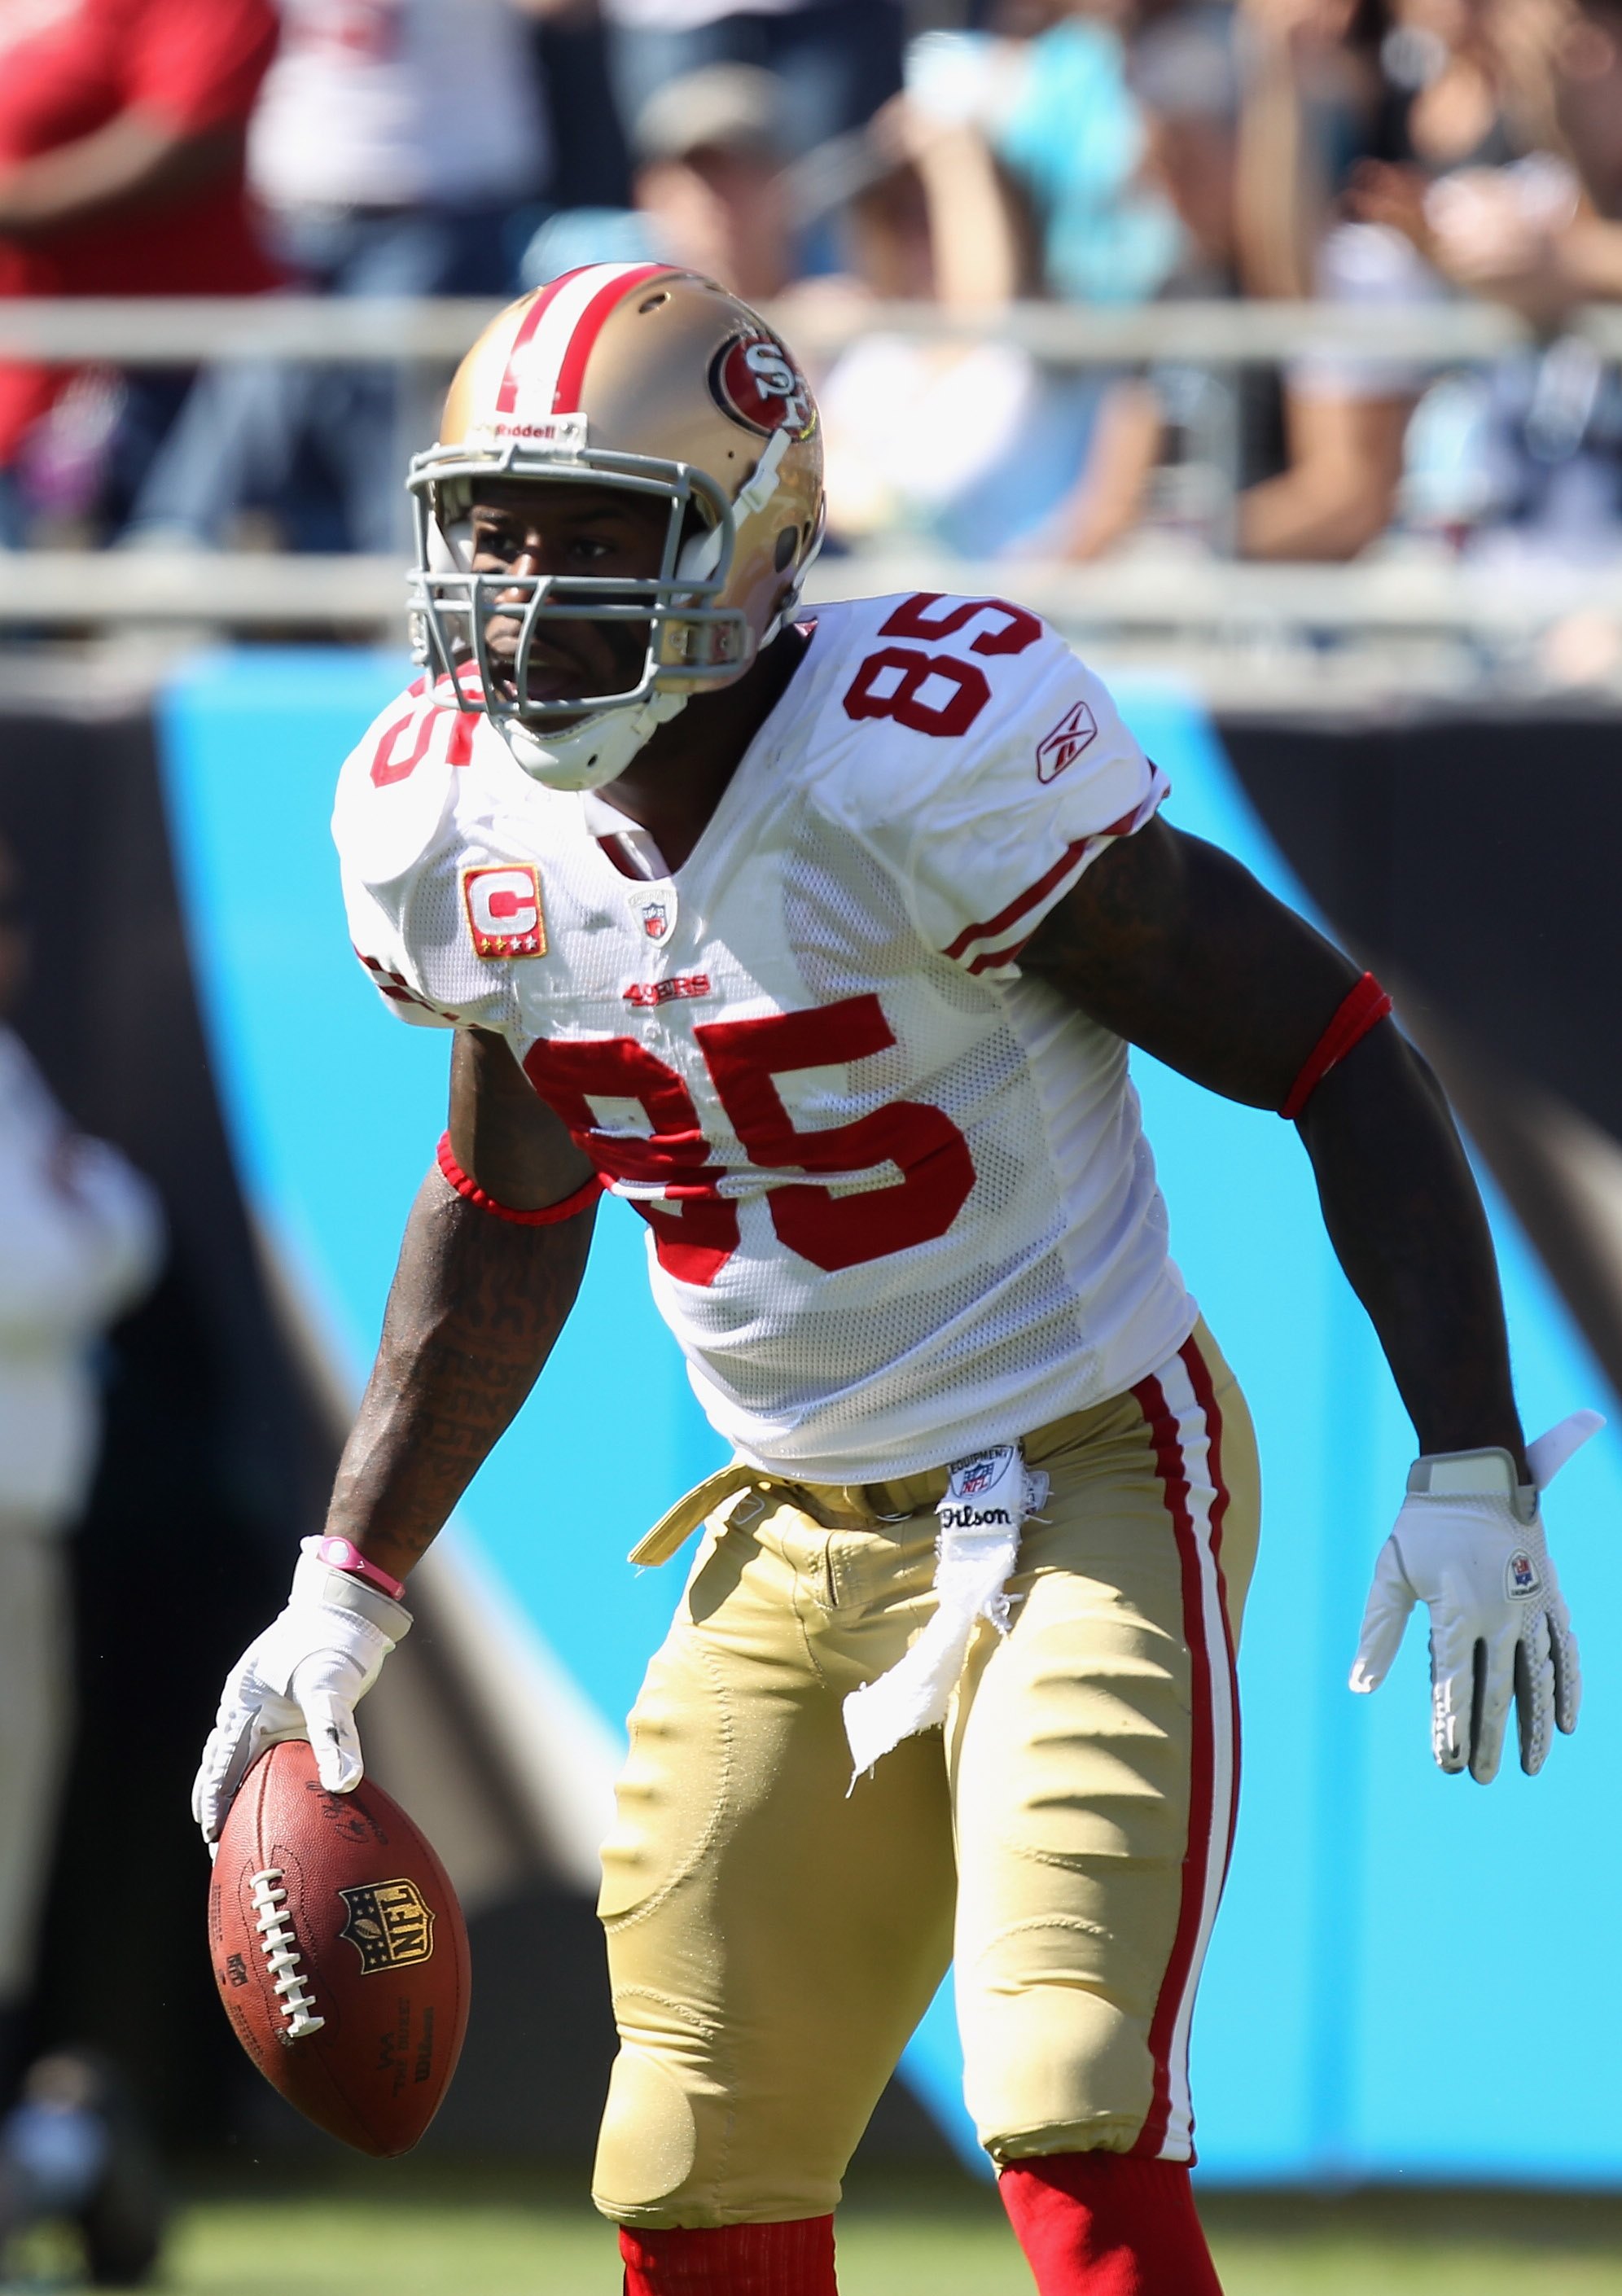 CHARLOTTE, NC - OCTOBER 24:  Vernon Davis #85 of the San Francisco 49ers against the Carolina Panthers during their game at Bank of America Stadium on October 24, 2010 in Charlotte, North Carolina.  (Photo by Streeter Lecka/Getty Images)